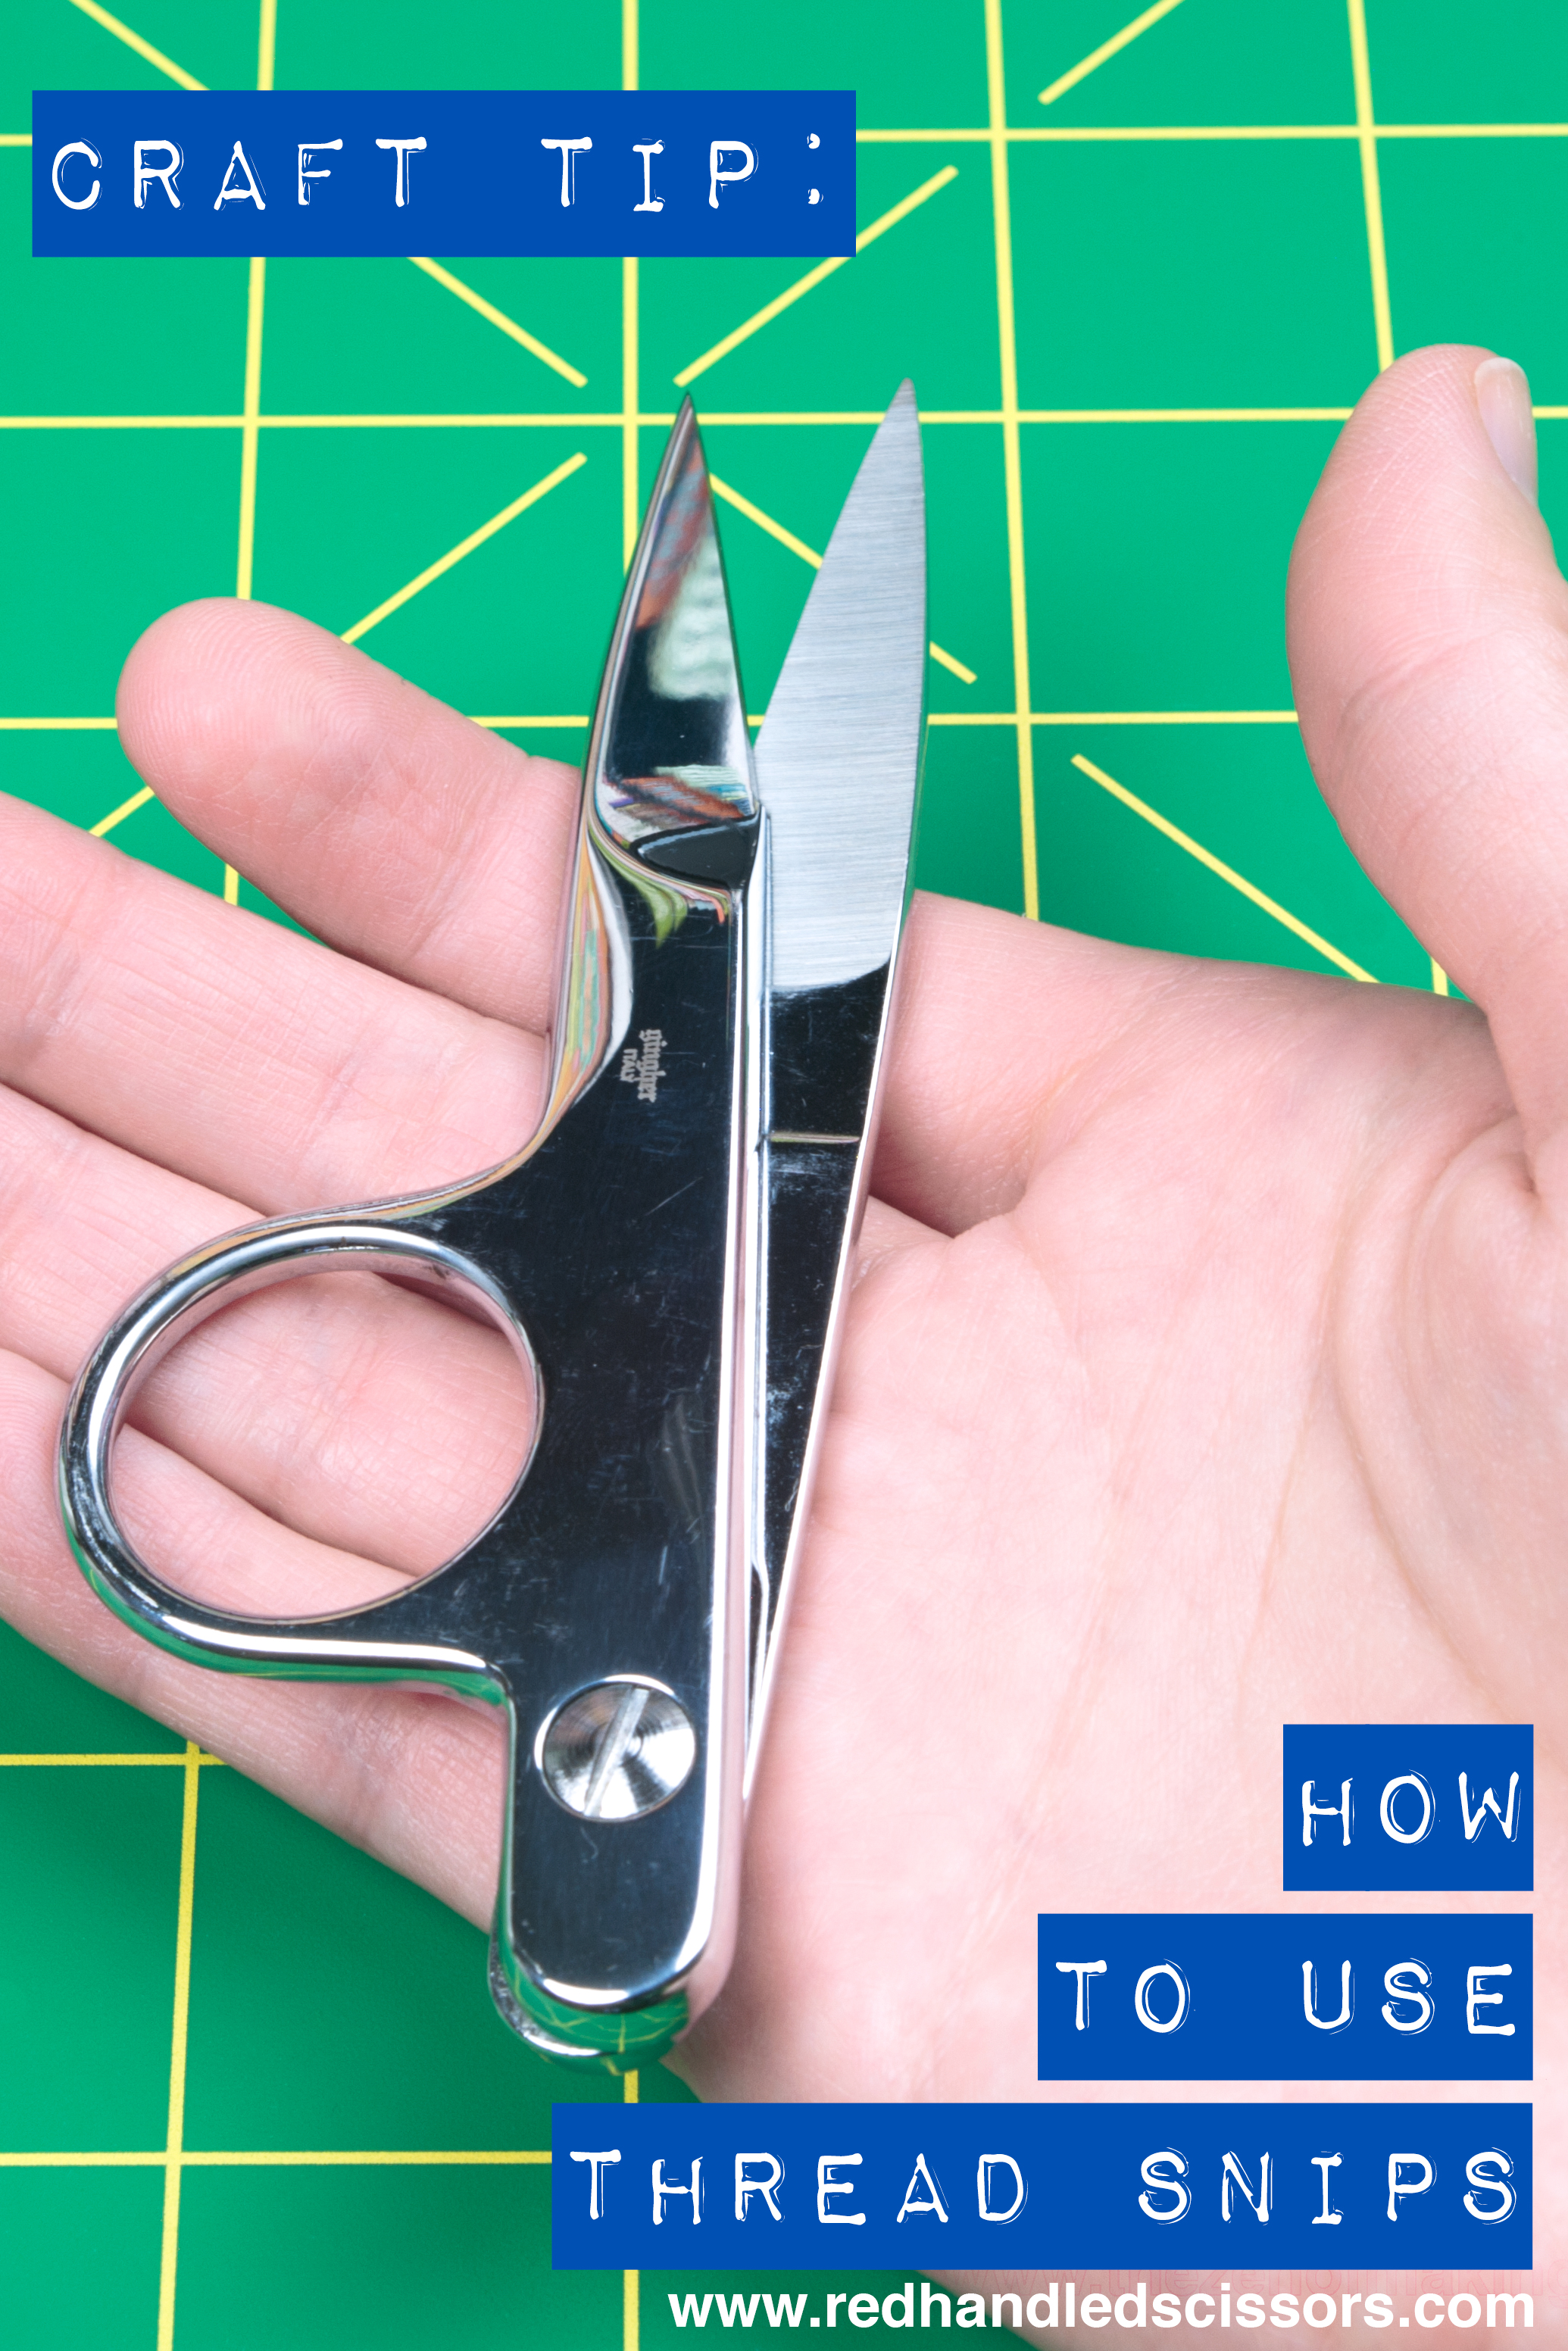 Tools: How to Use Thread Snips